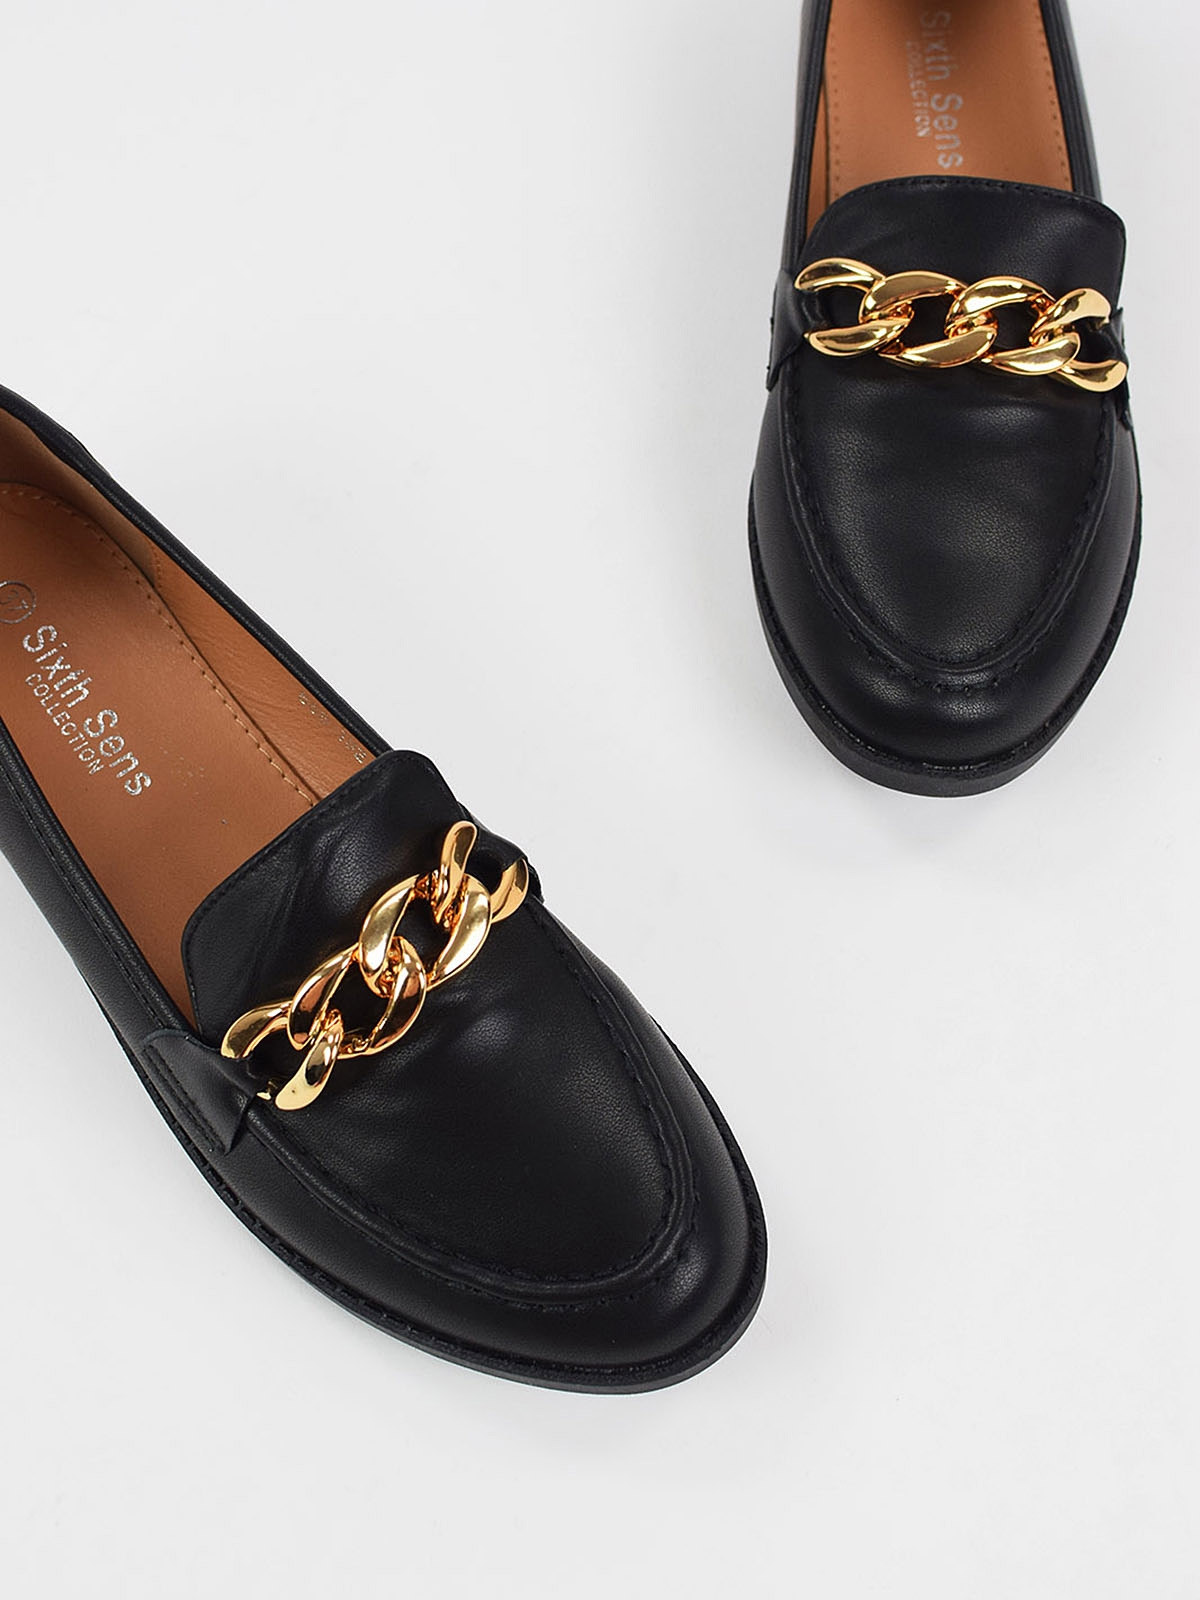 Gold color chain loafers in black